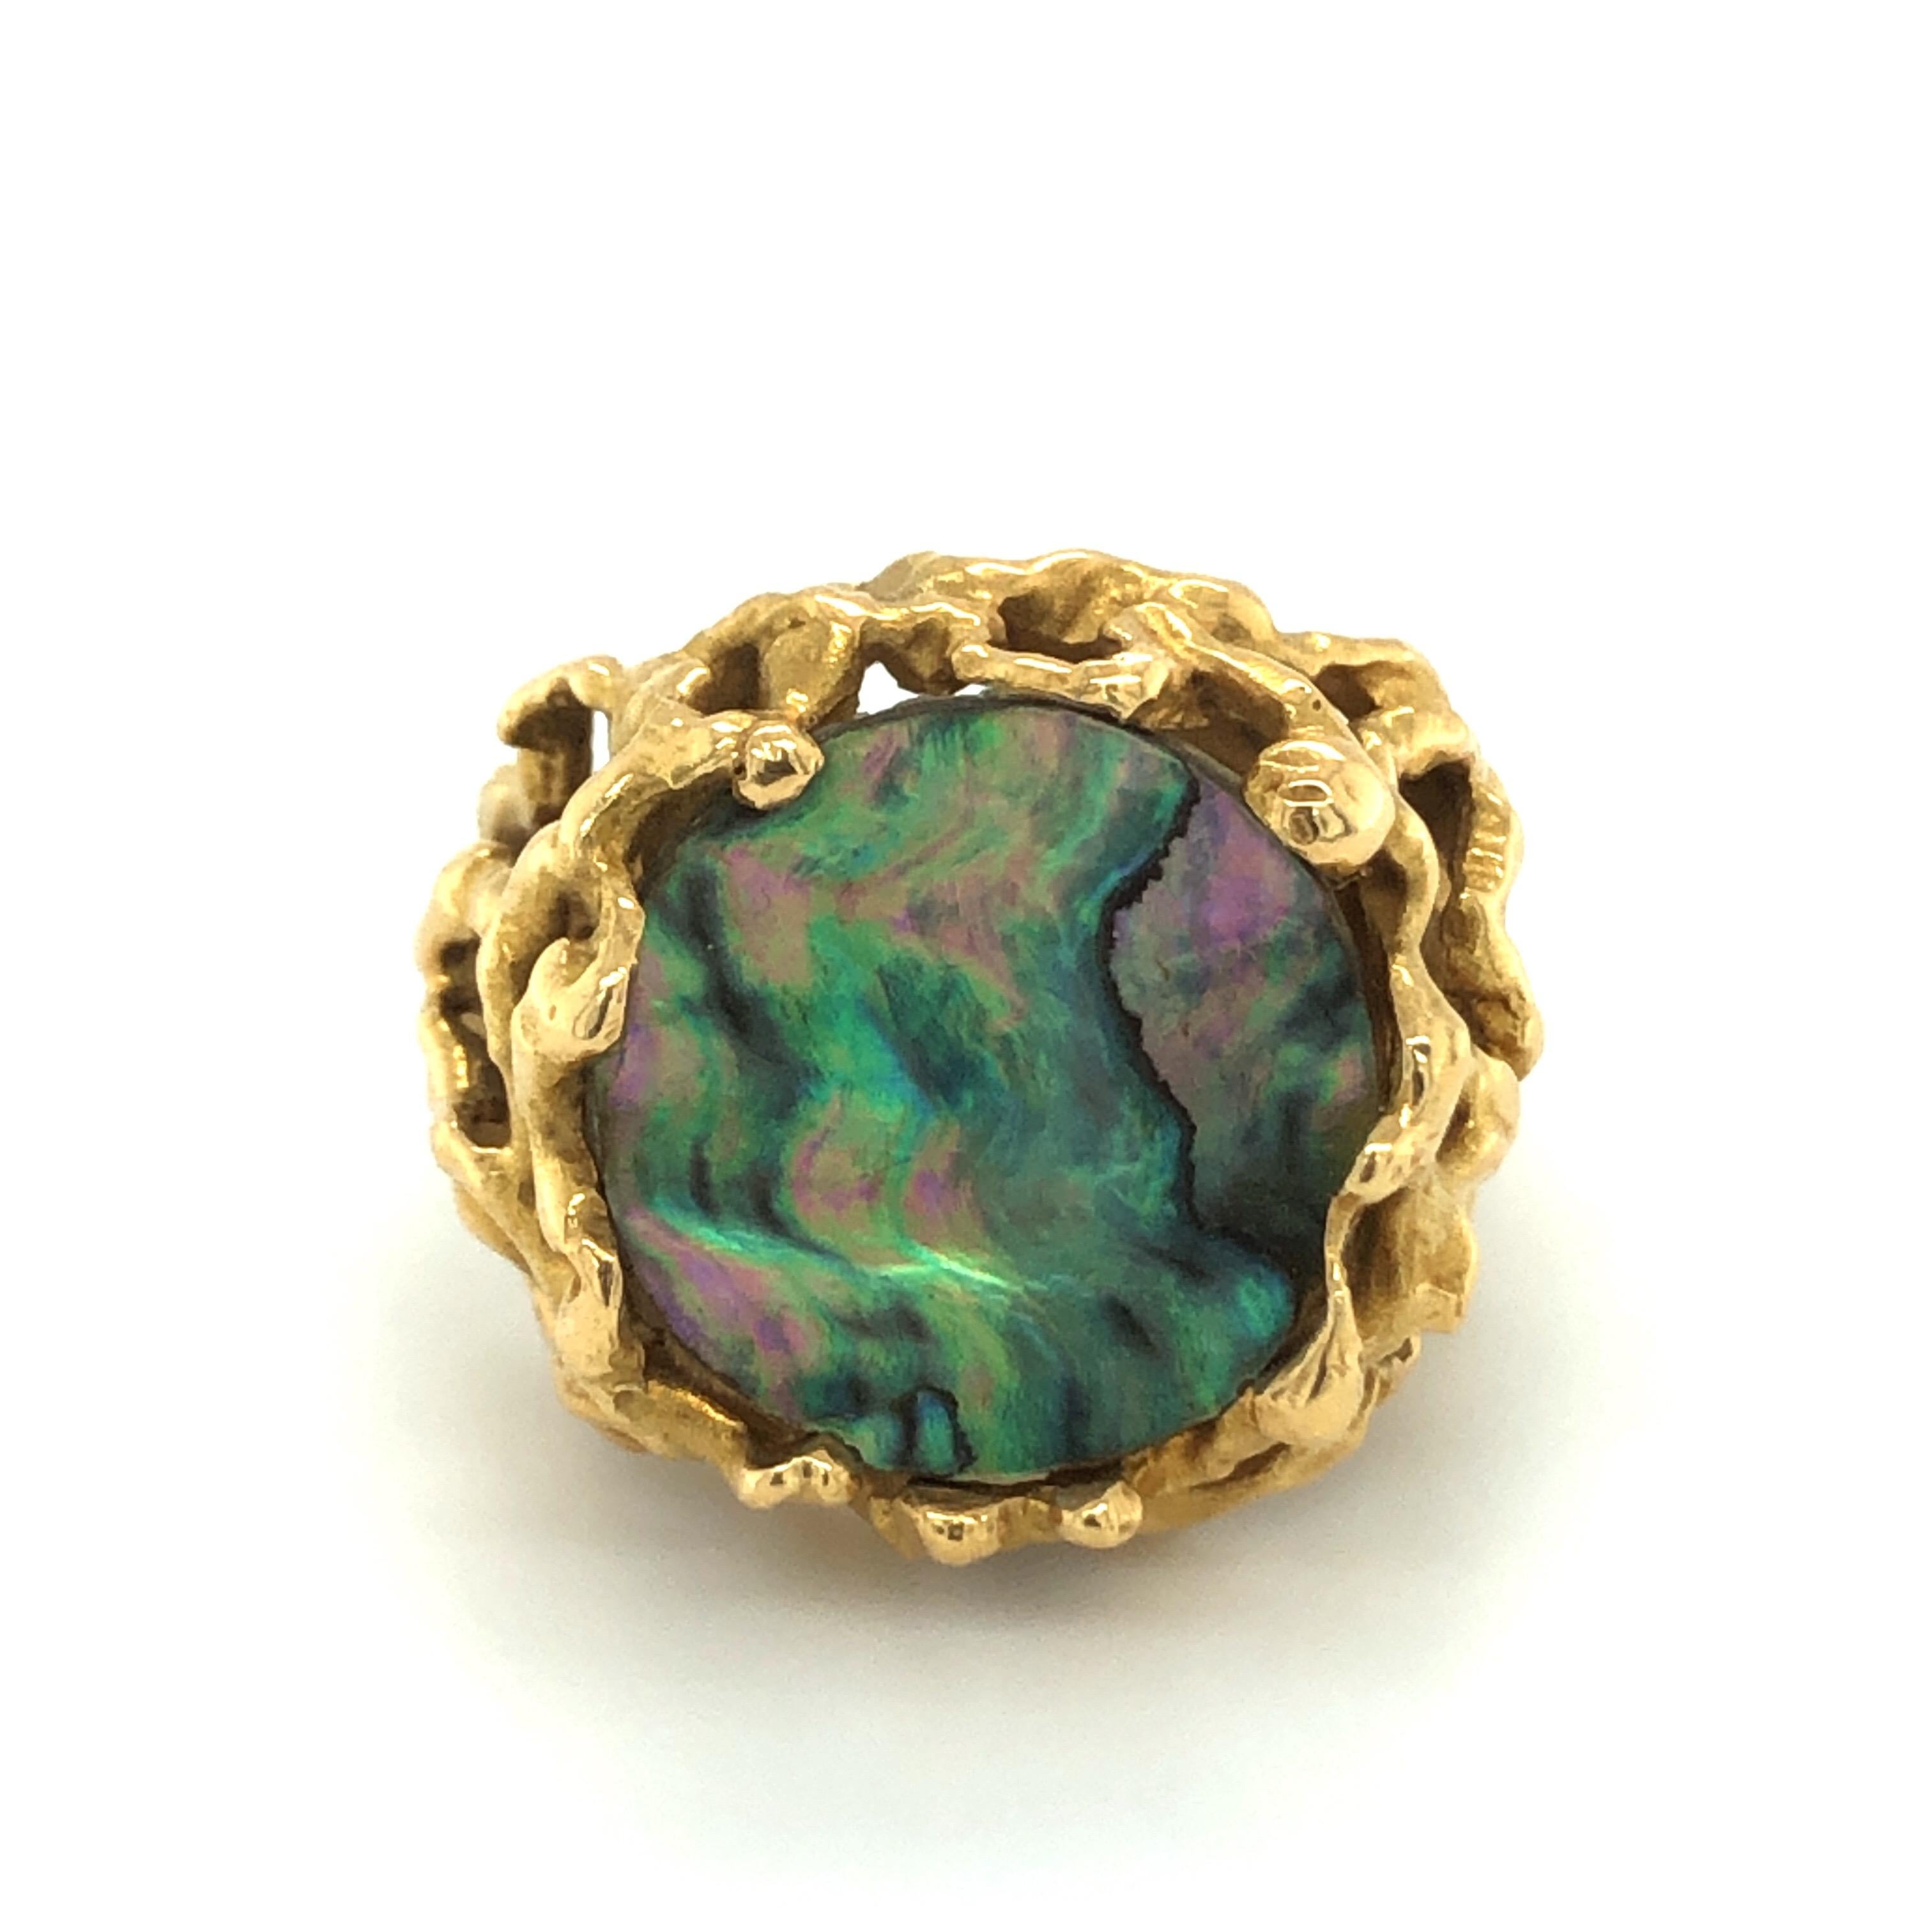 18 karat yellow gold abalone 1970s ring by renowned Swiss jeweler Gubelin.

Eye-catching 18 karat yellow gold ring designed as a bundle of tangled branches and set with a round iridescent abalone platelet. The irregular appearance of the gold mount